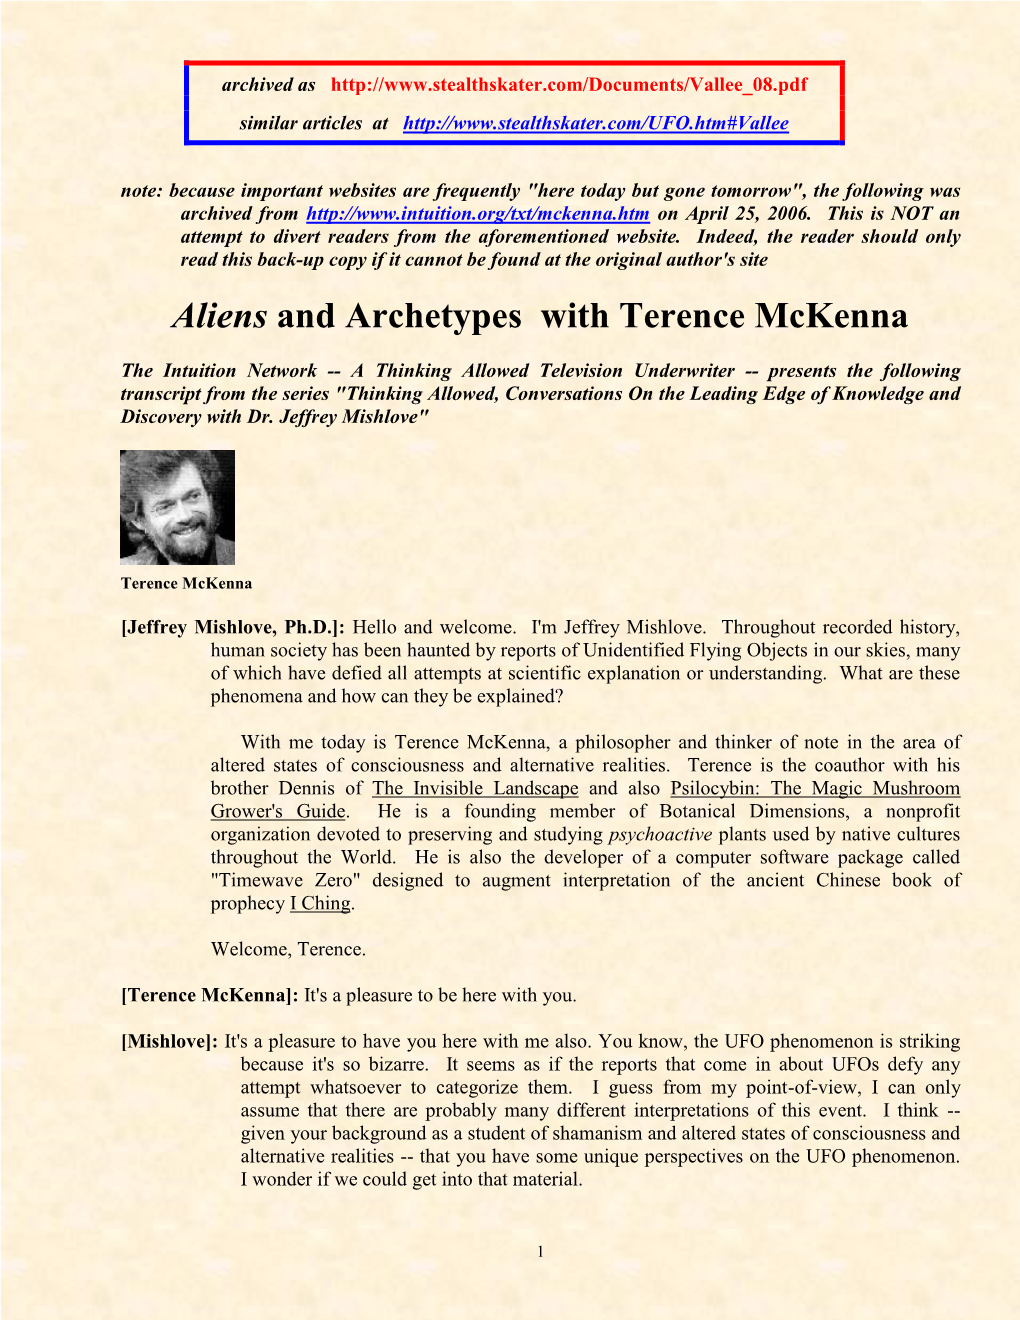 Aliens and Archetypes with Terence Mckenna